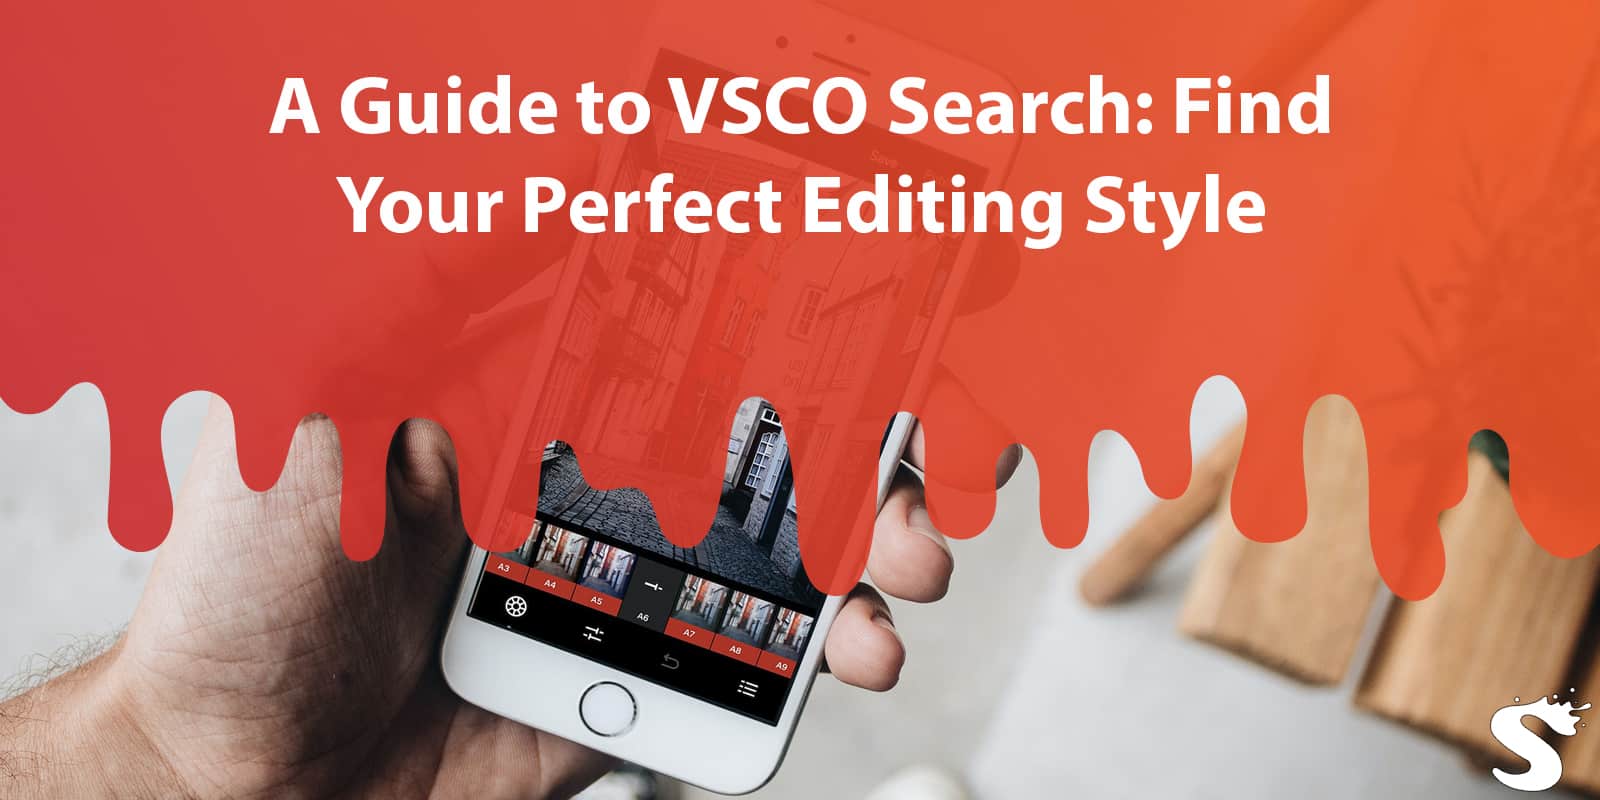 A Guide to VSCO Search: Find Your Perfect Editing Style